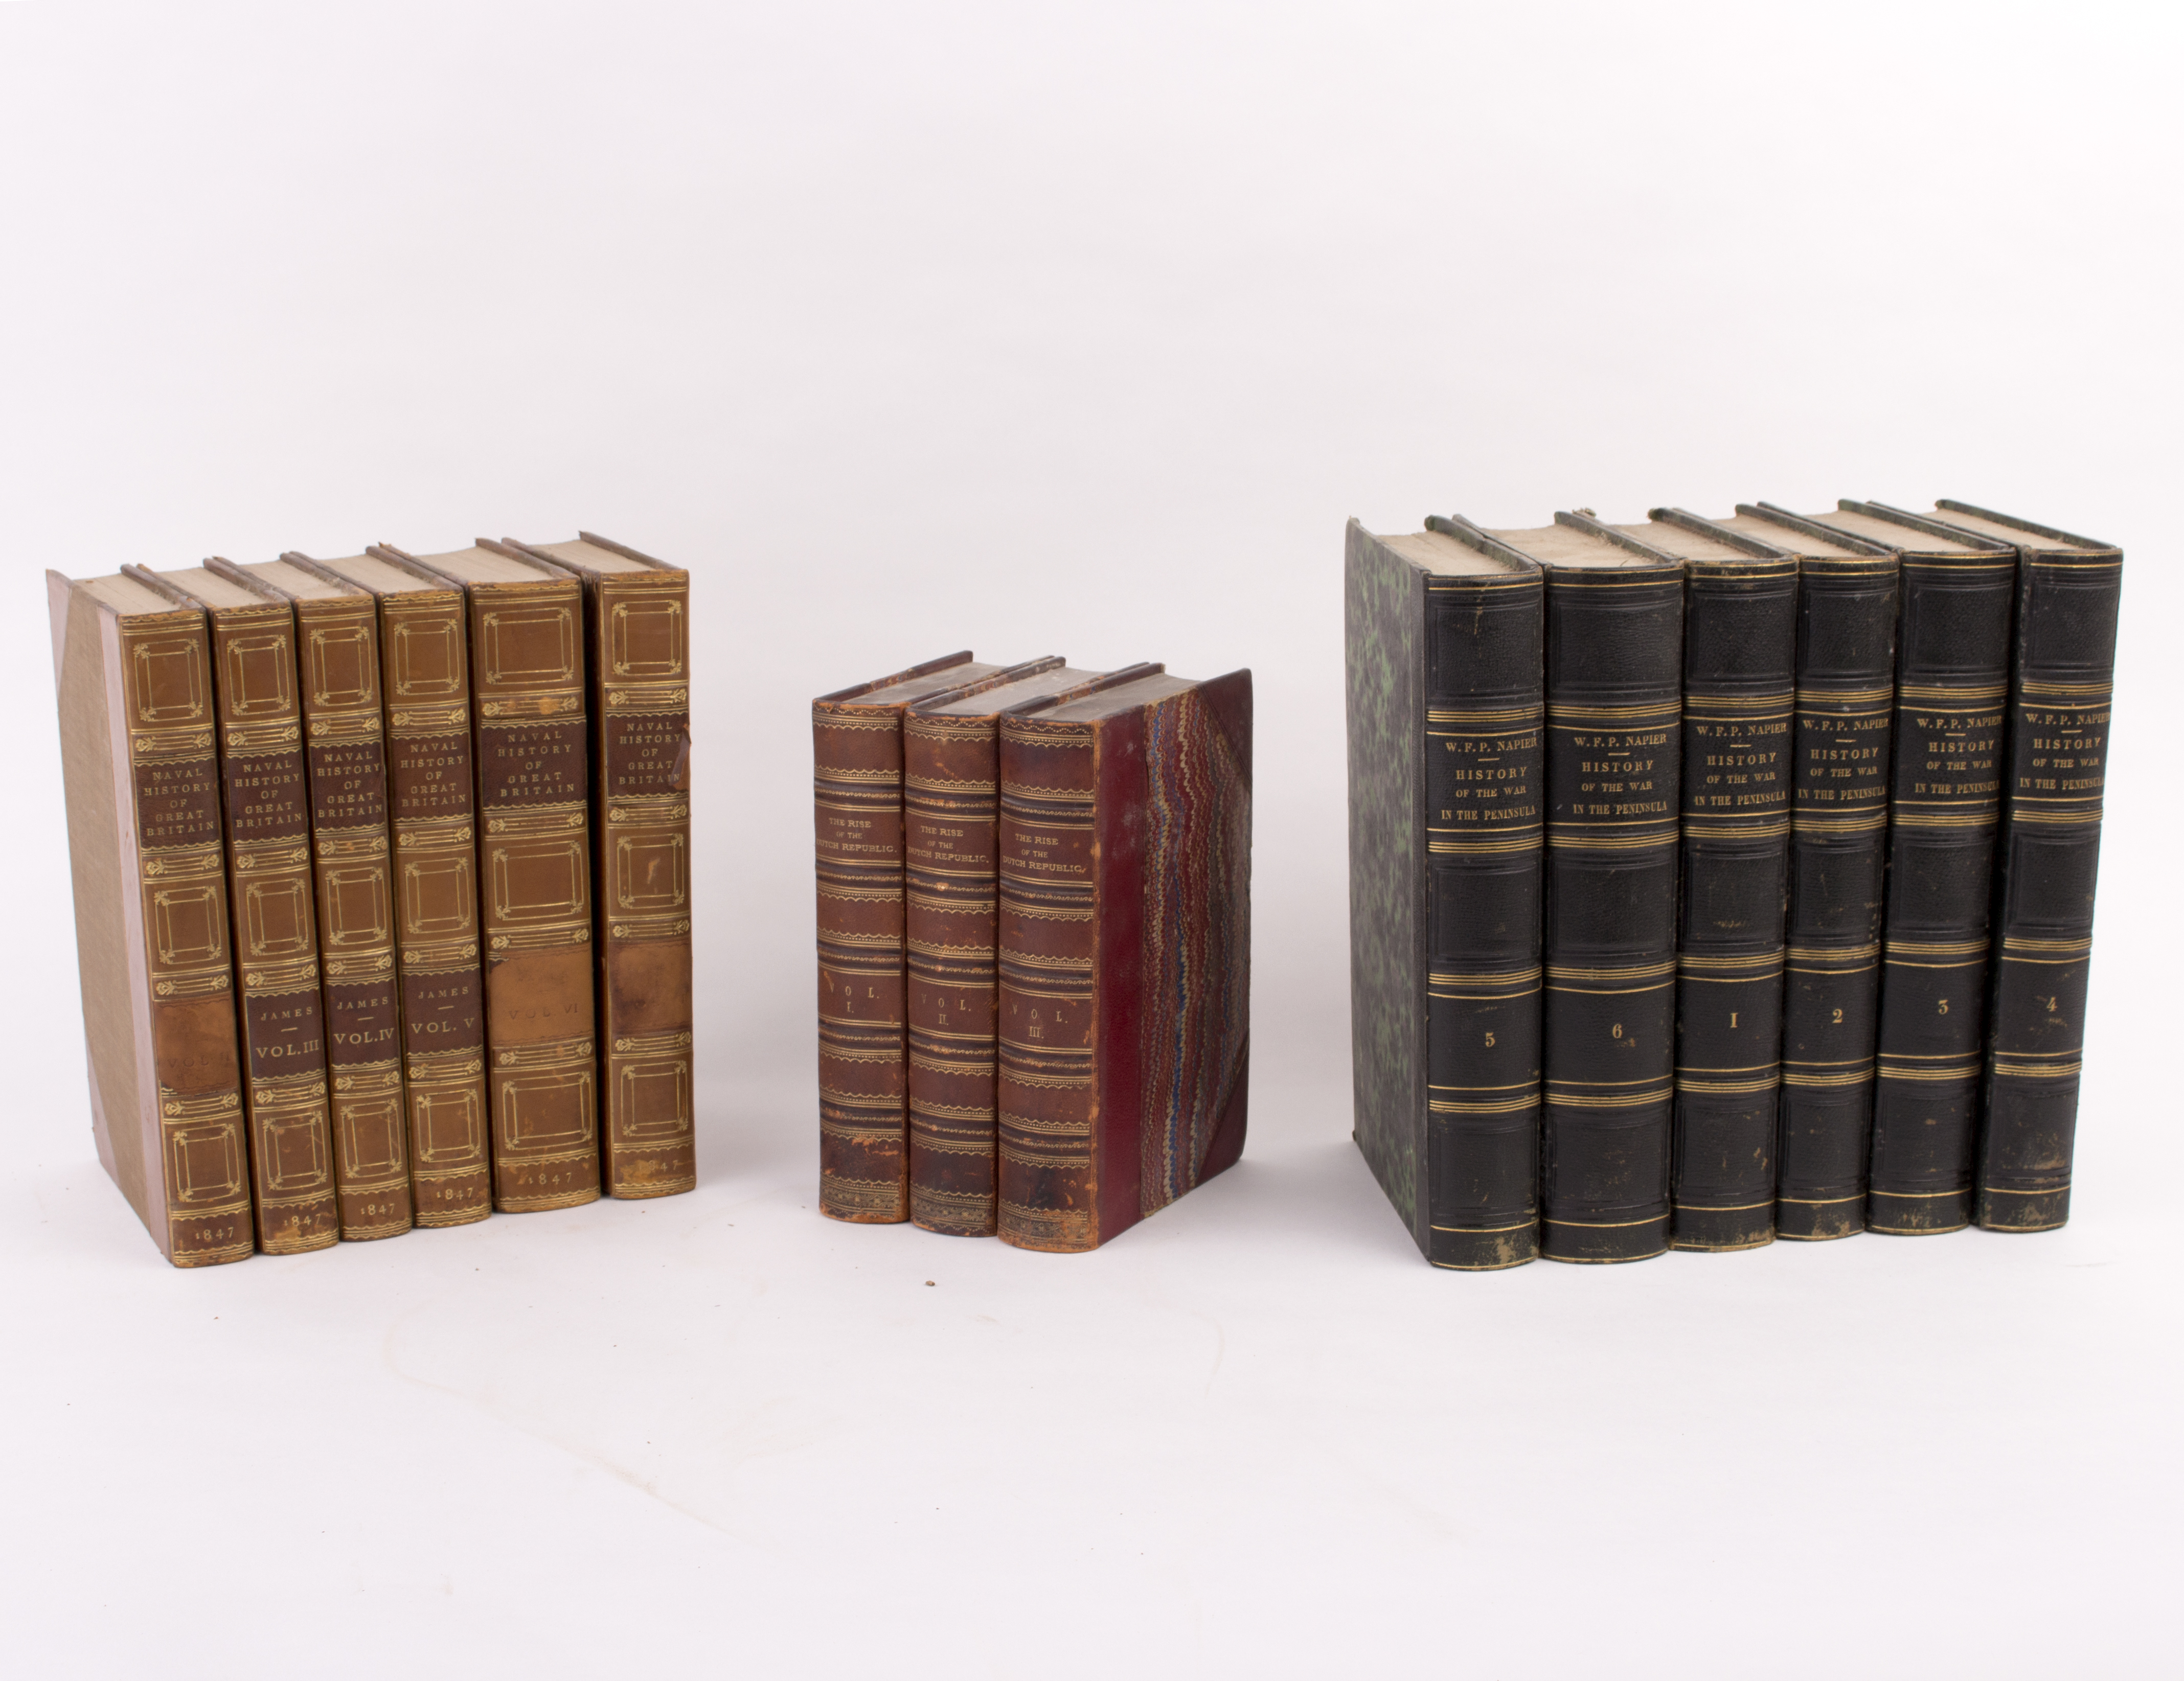 History, 34 vols., library sets including James, William.